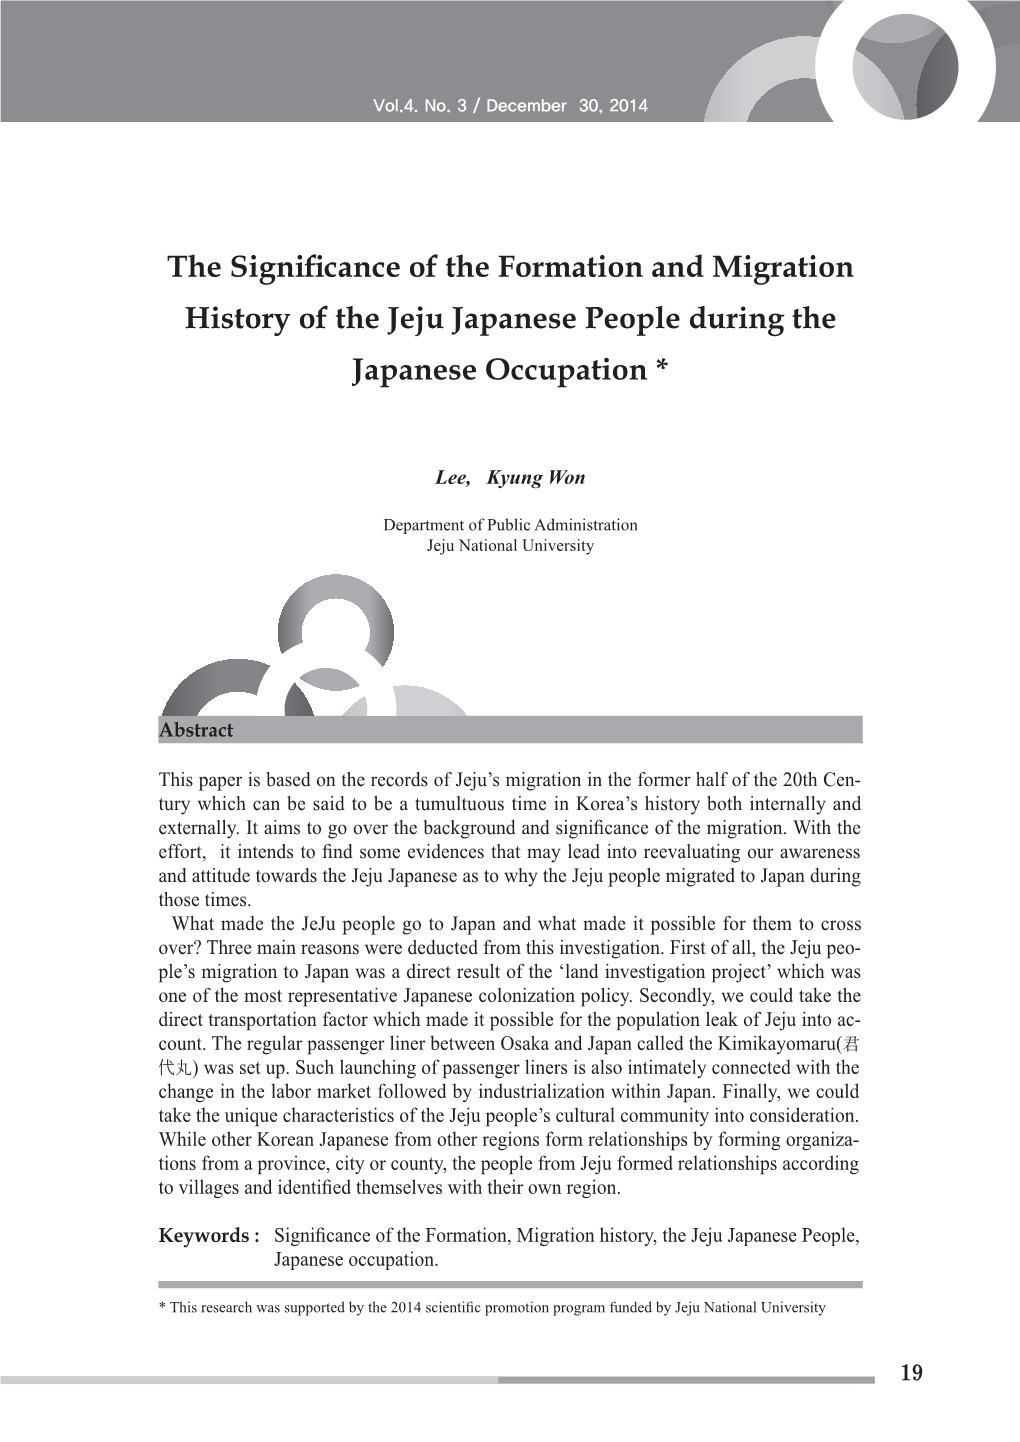 The Significance of the Formation and Migration History of the Jeju Japanese People During the Japanese Occupation *